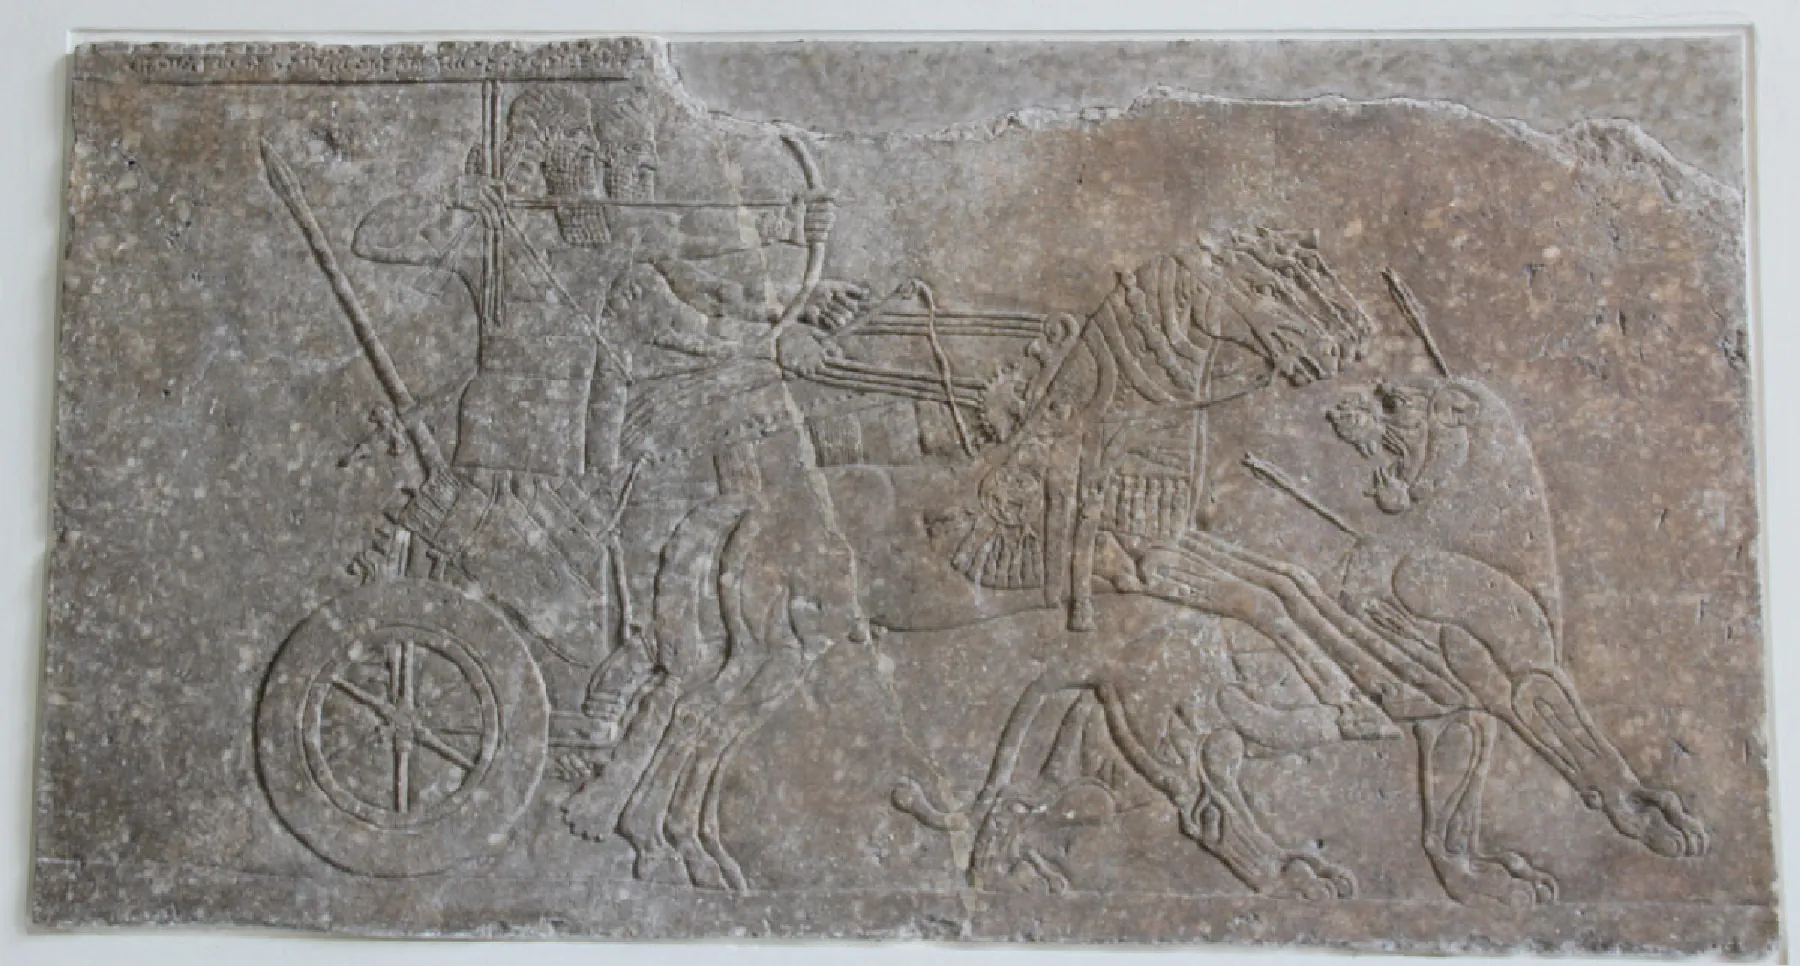 A picture of a gray stone carving is shown with a crack running down the middle and a piece missing from the top right. The scene depicts two figures in the back of a standing chariot being pulled by two horses chasing a lion. The two figures wear long headdresses, have long beards, and have cloths around their waists. The figure in the back holds the reins of the chariot while the figure in the forefront aims a bow and arrow to the right. A spear sticks out the back of the chariot. The two horses pulling the chariot have elaborate décor on their heads and their front legs are in the air. The muscular lion is facing backward toward the horse and chariot and baring its teeth. Arrows stick out its head and shoulders.